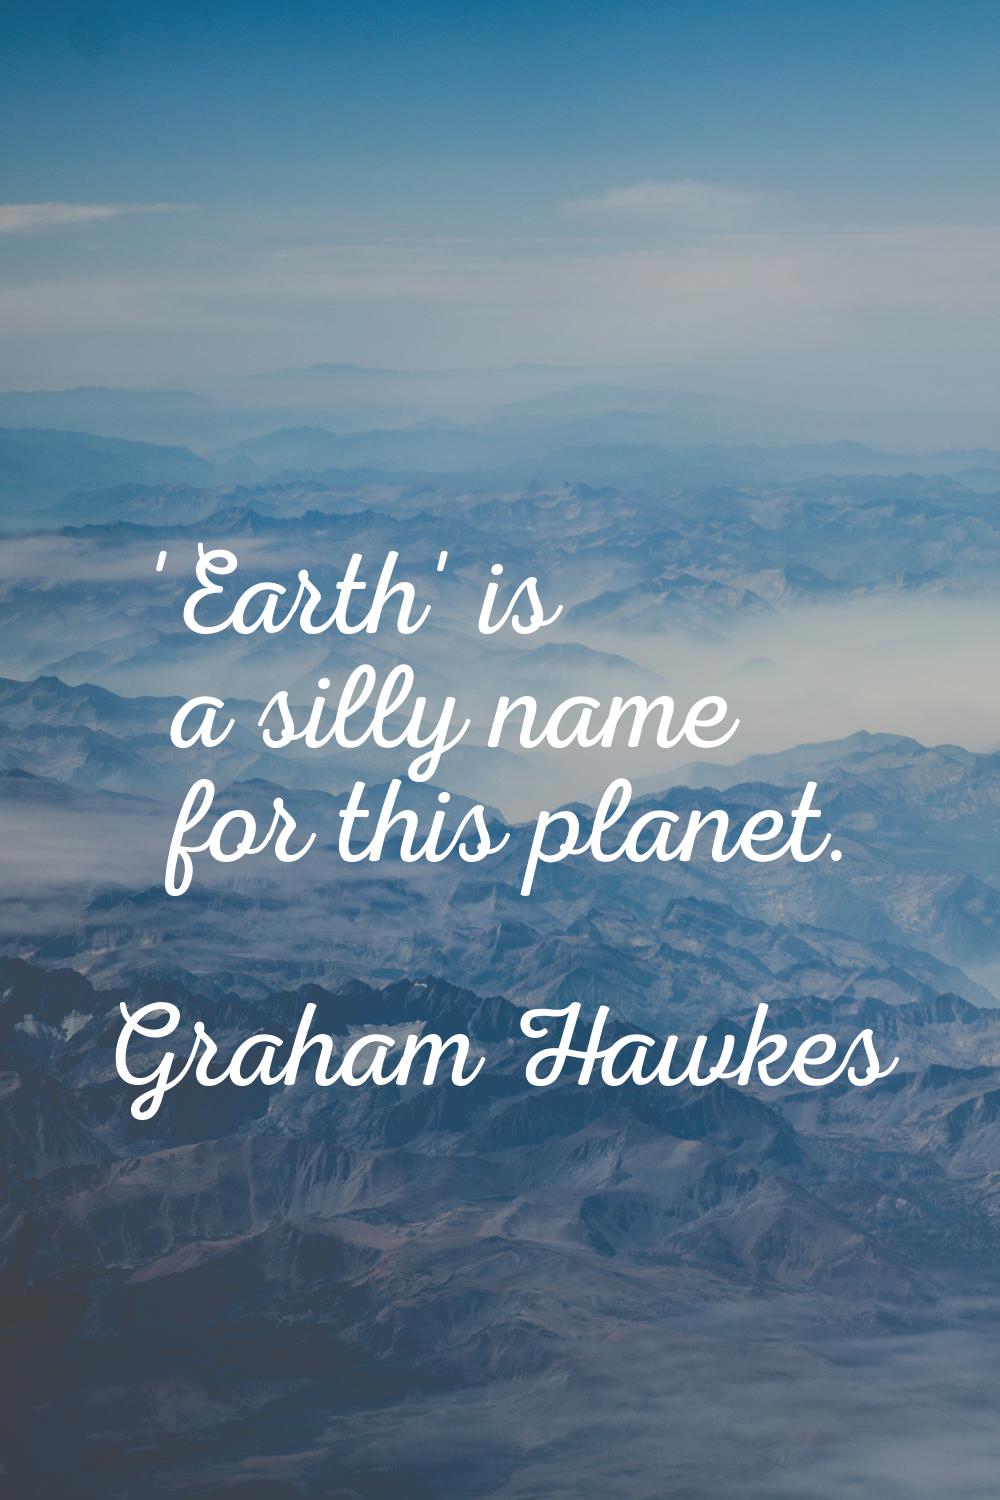 'Earth' is a silly name for this planet.